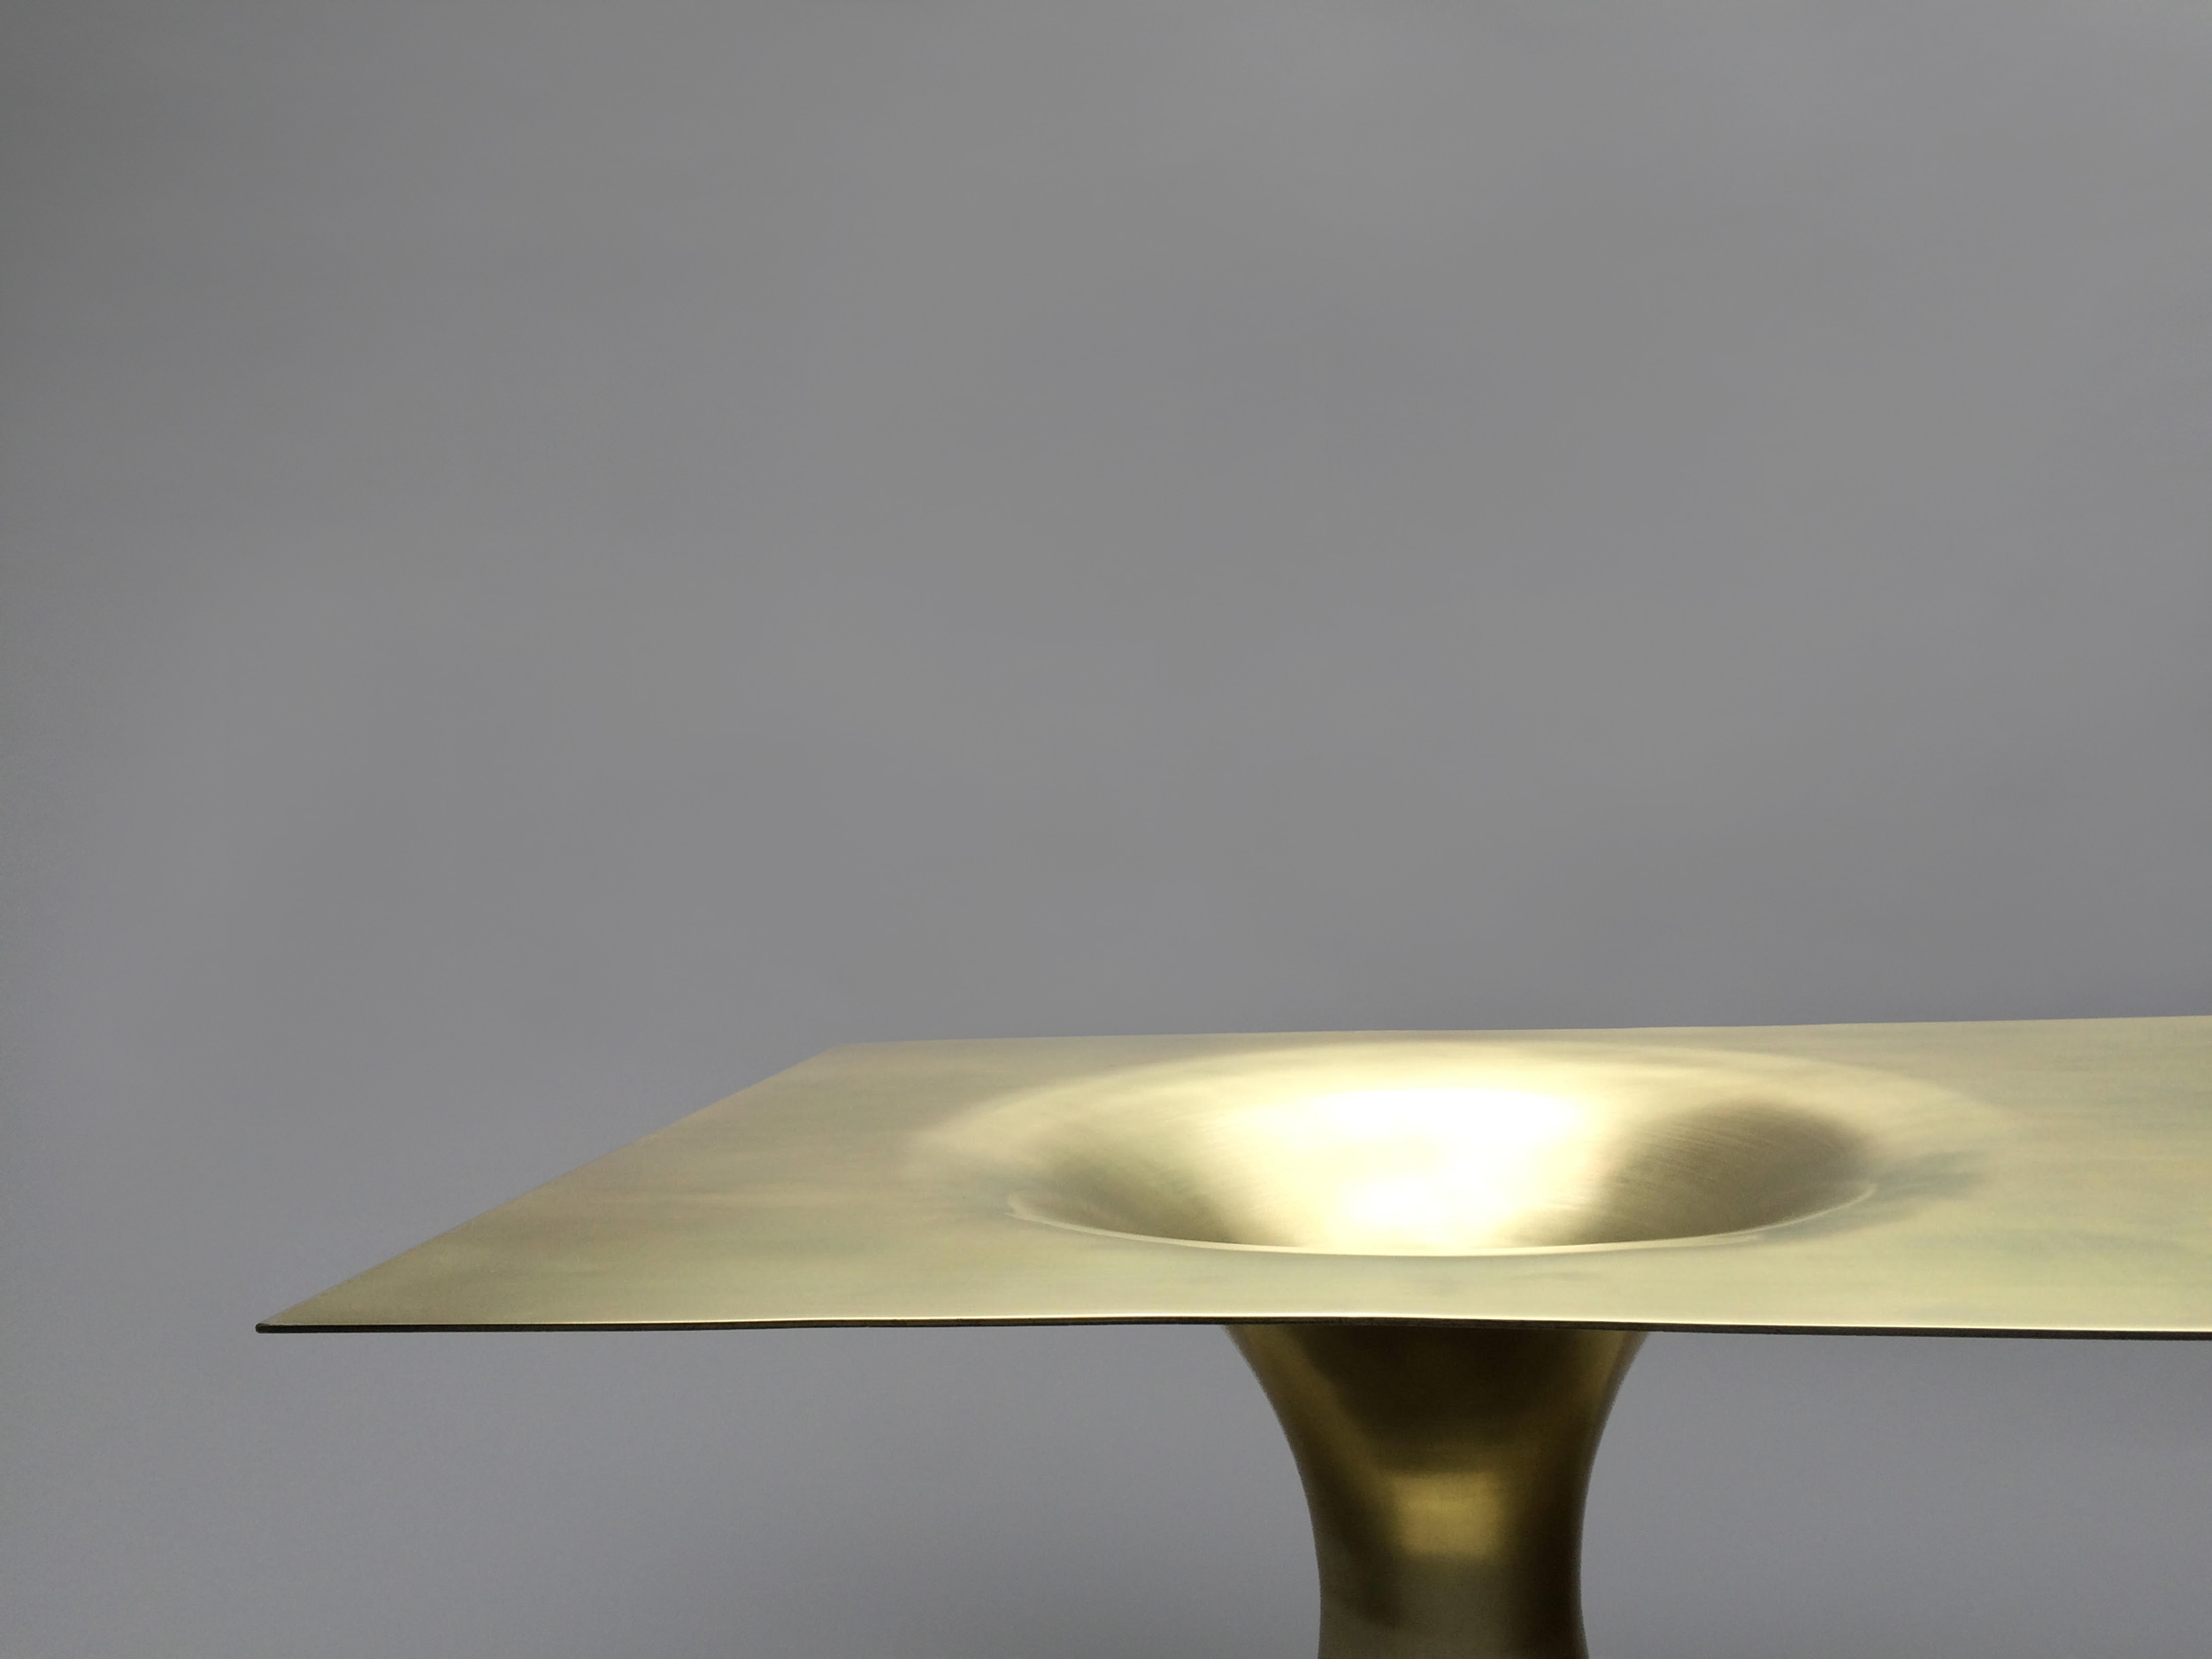   Brass plated steel   Brushed finish 60” L x 20” D x 15.5” H  